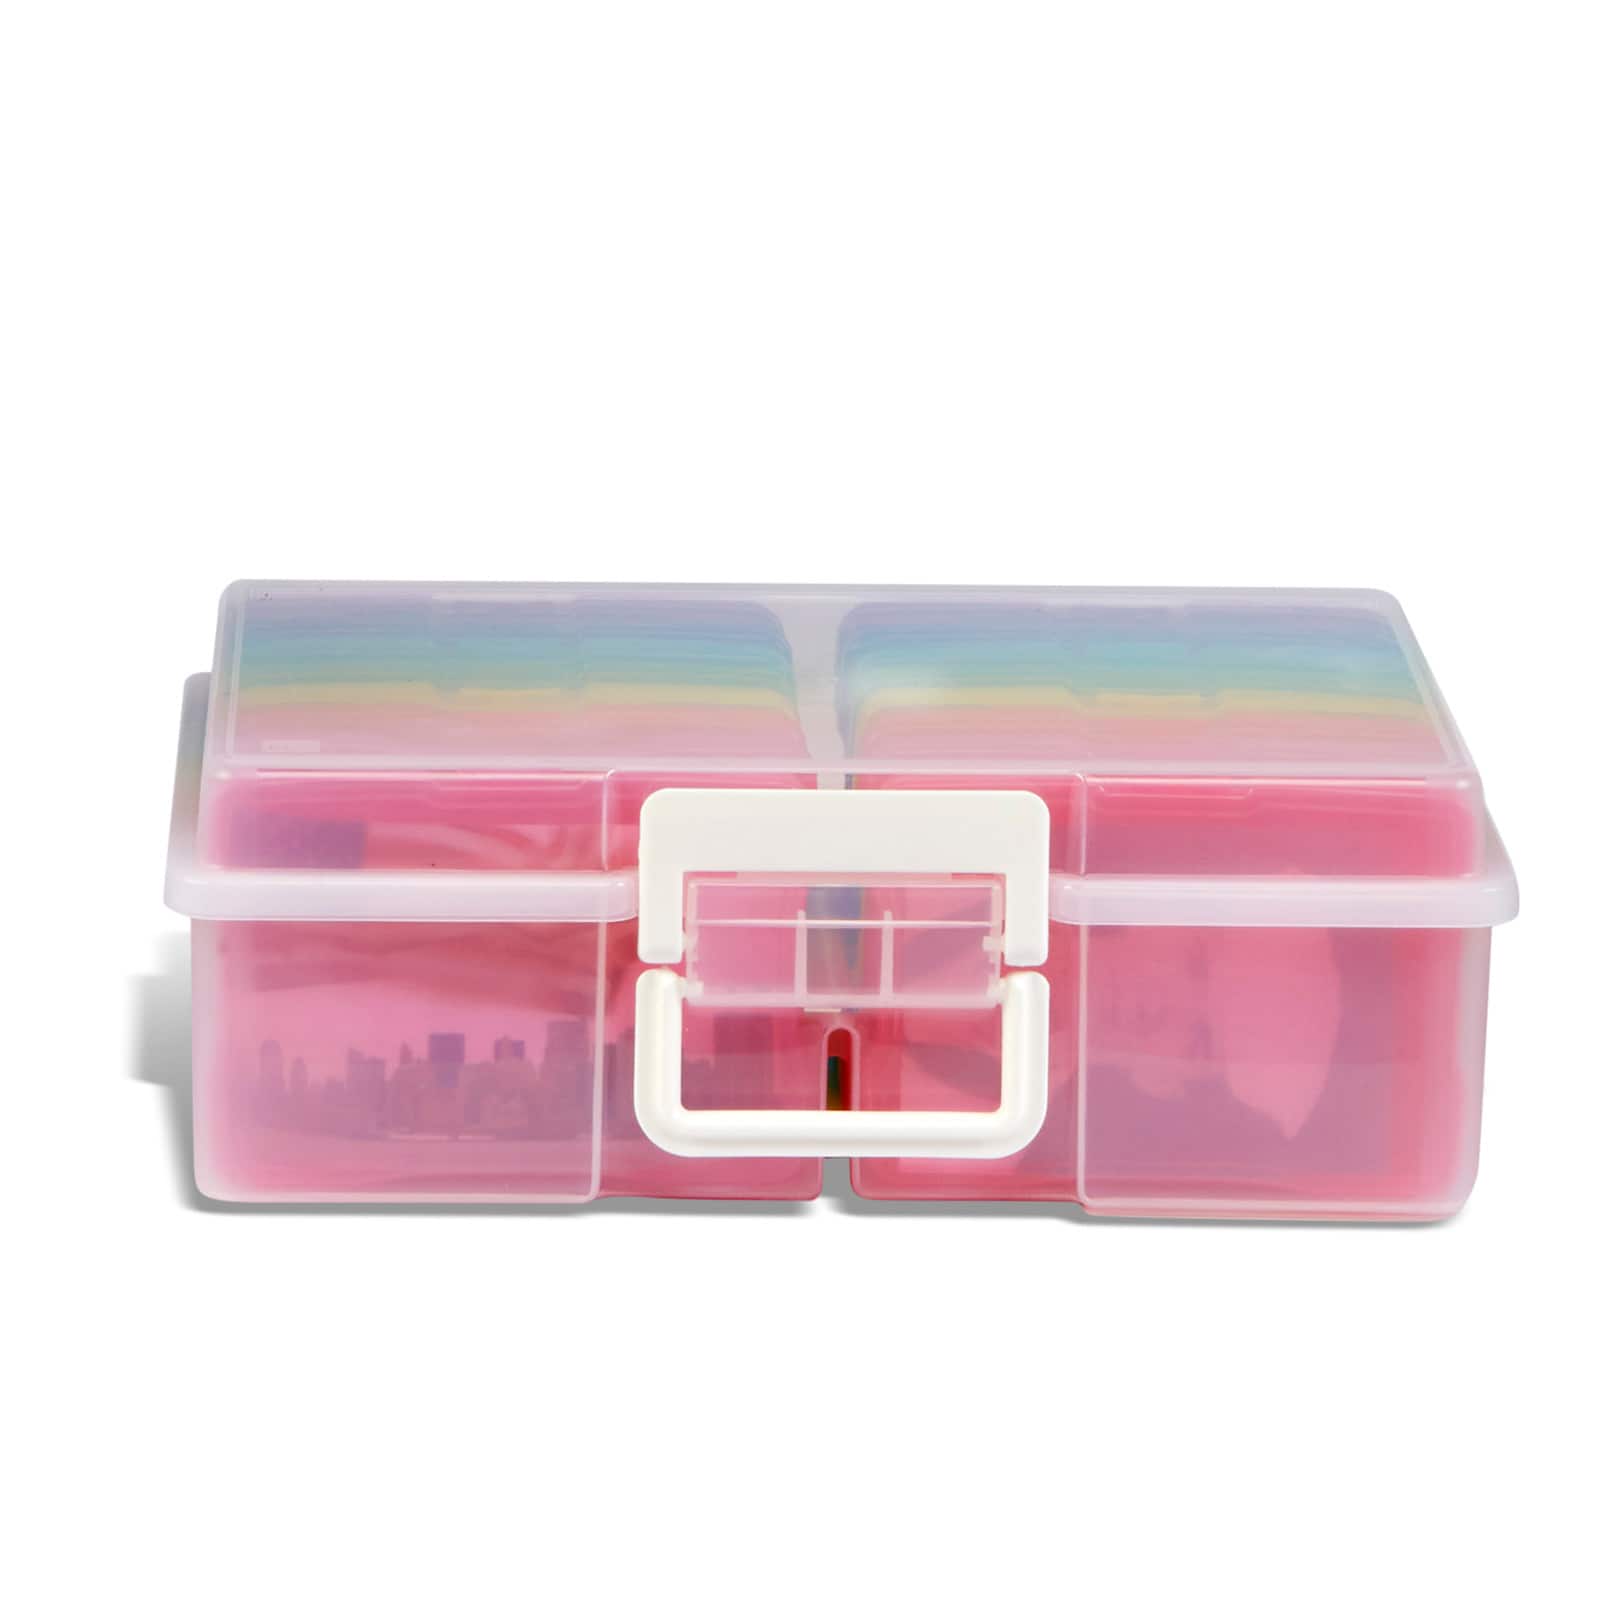 Transparent Plastic Box Crafts Organizer Jewelry Keeper Clear Packaging 